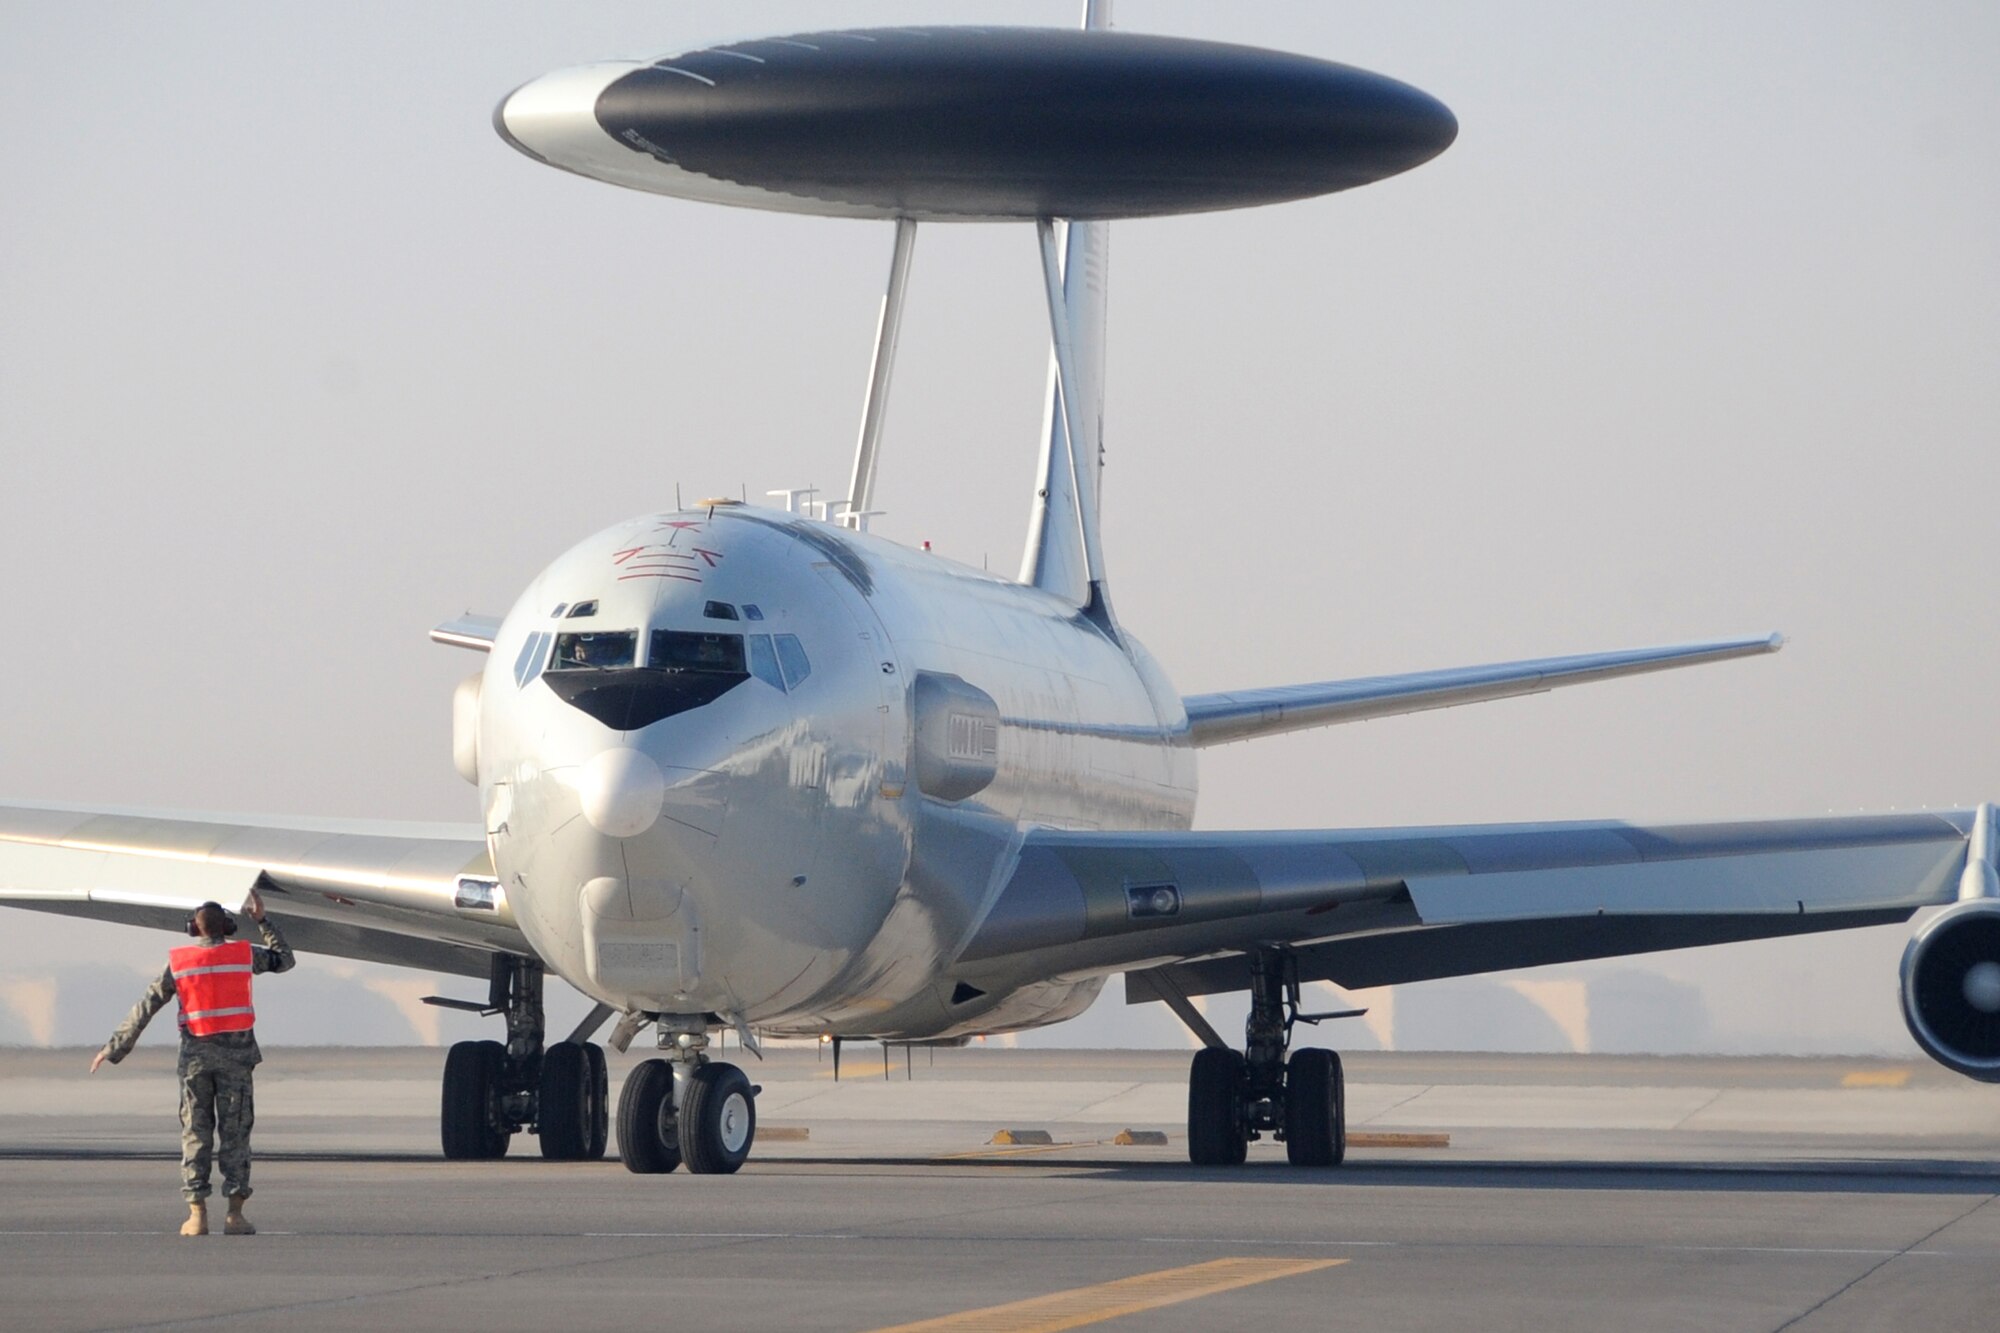 A E-3 Sentry Airborne Warning and Control System aircraft taxis out to the runway at an undisclosed location in Southwest Asia on Jan. 16.The E-3 Sentry is a modified Boeing 707/320 commercial airframe with a rotating radar dome that provides situational awareness of friendly, neutral and hostile activity, command and control of an area of responsibility, battle management of theater forces, all-altitude and all-weather surveillance of the battle space, and early warning of enemy actions during joint, allied, and coalition operations. (U.S. Air Force photo/Senior Airman Jenifer H. Calhoun/Released)
